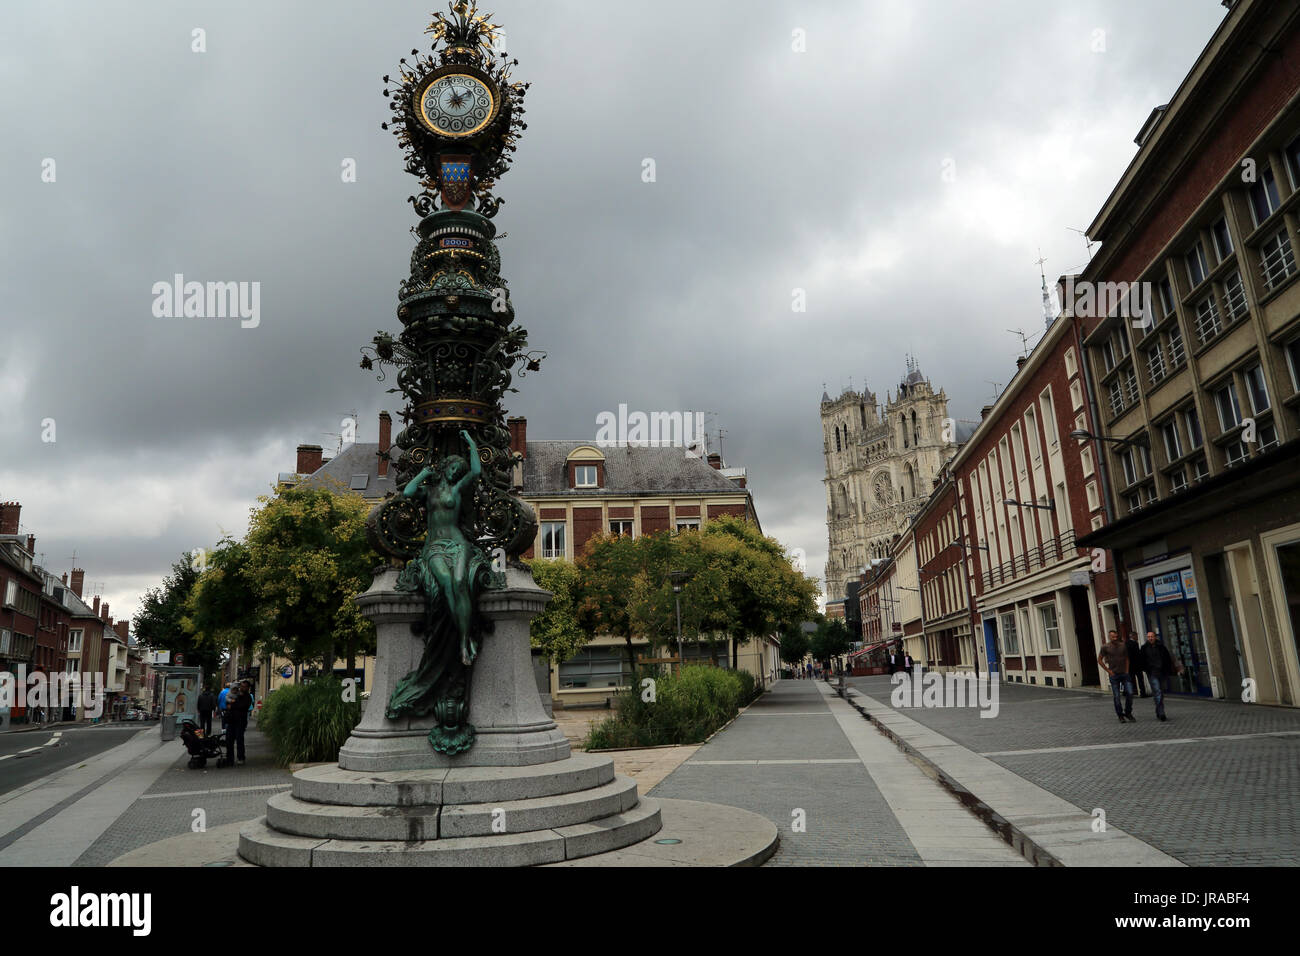 Marie sans chemise - horloge dewailly (architectural clock) made by Emile Ricquier and Albert Roze, Rue des Sergents, Amiens, Somme, France Stock Photo